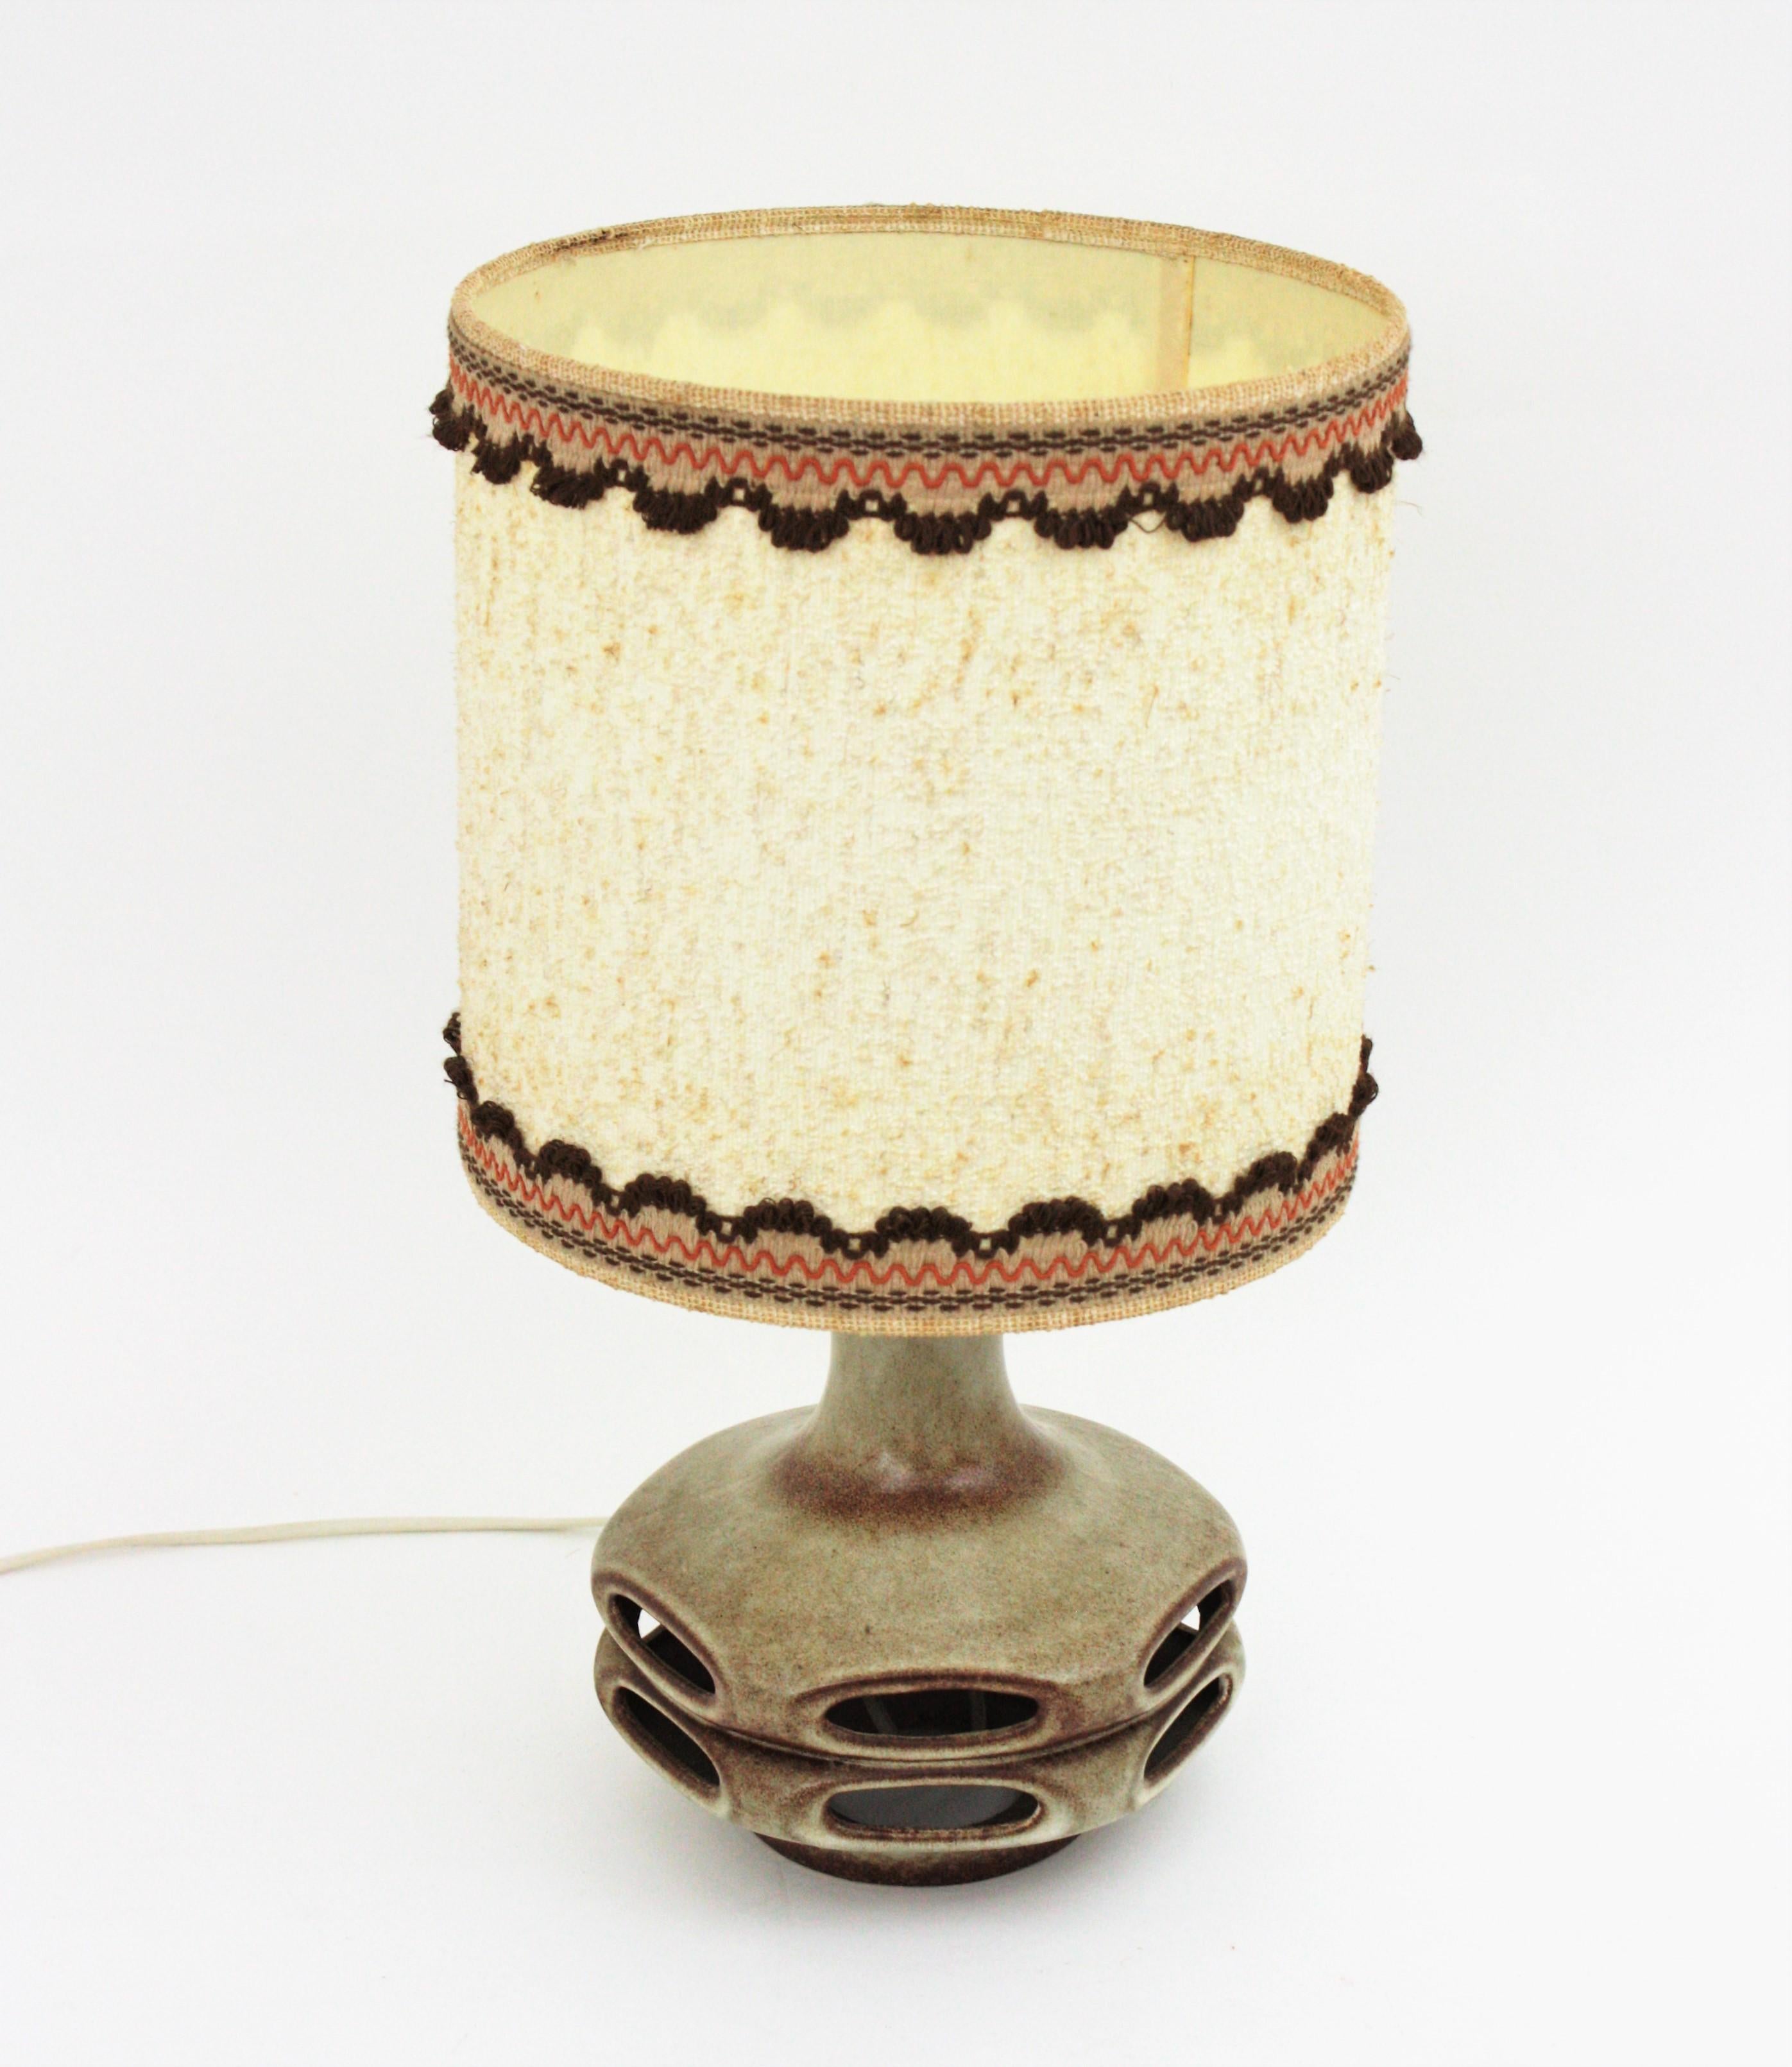 Mid-Century Modern ceramic table lamp with original textile lampshade. Germany, 1960s.
The base of the lamp has a design with holes that allows a highly decorative lighting effect.
Glazed ceramic in shades of brown.
Original fabric lampshade with